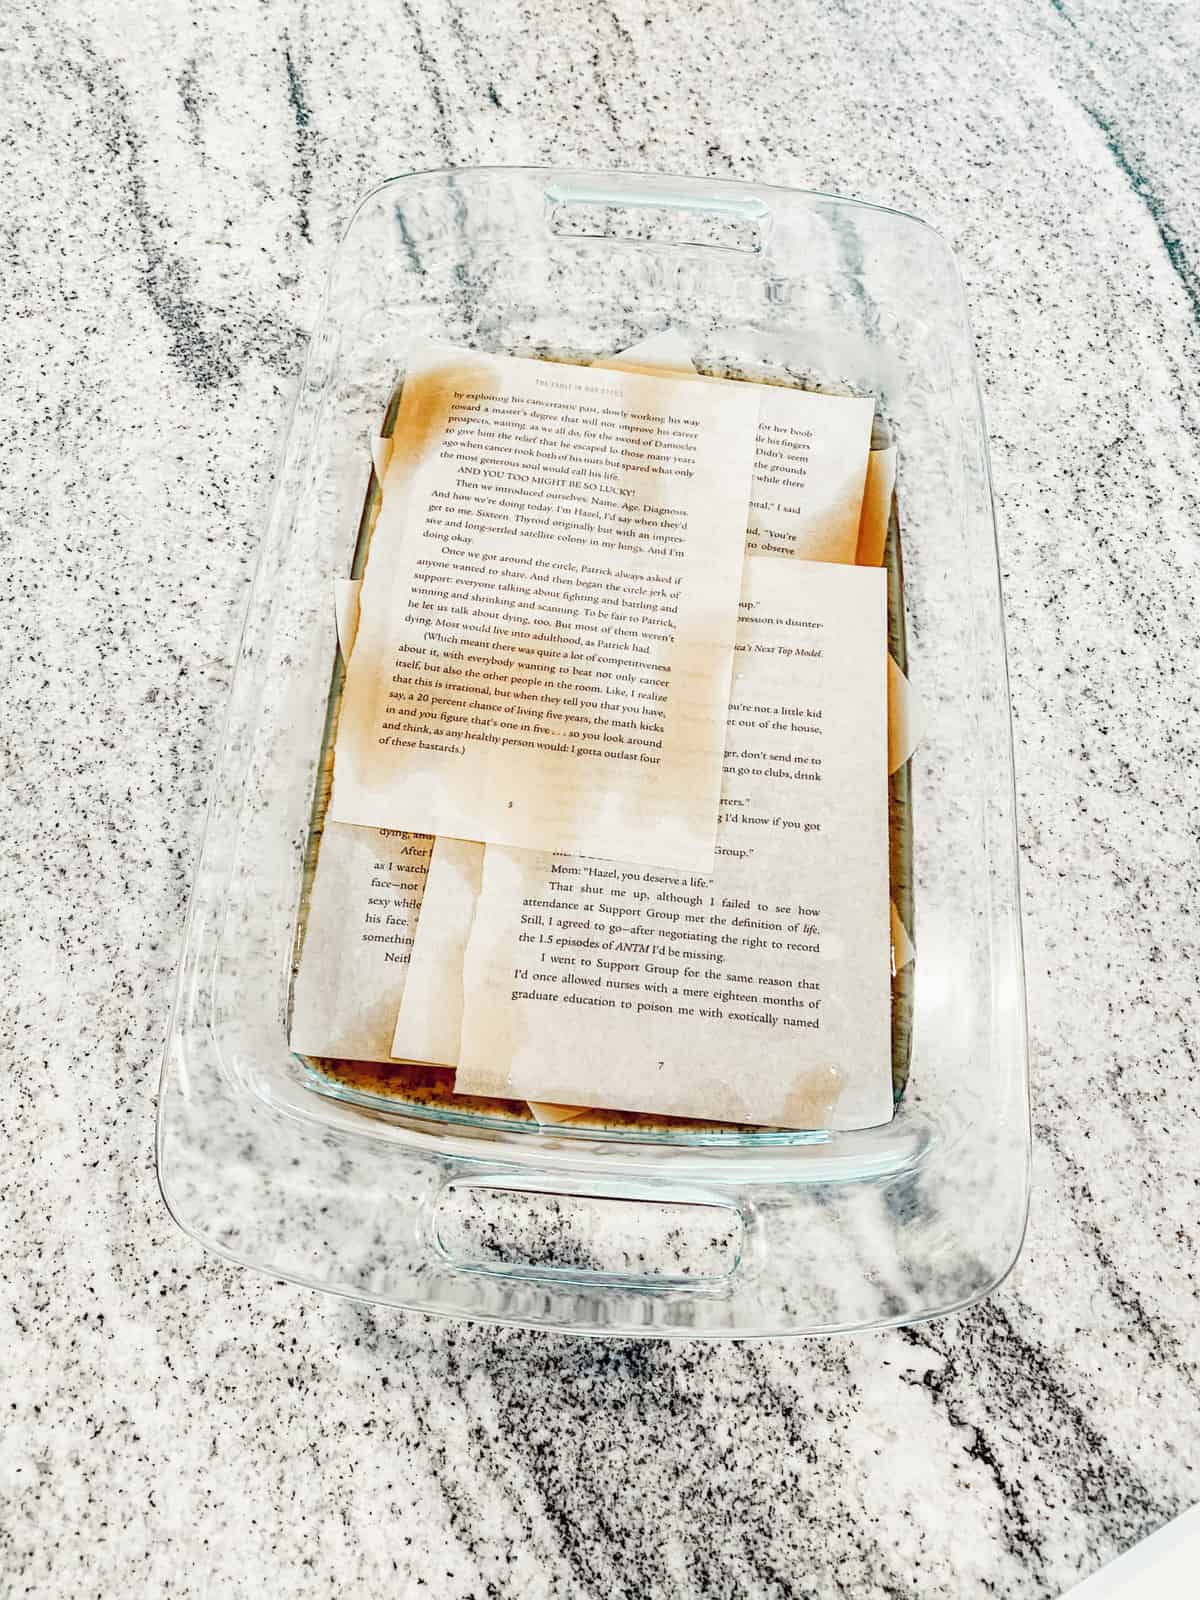 Book Pages Soaking in Tea